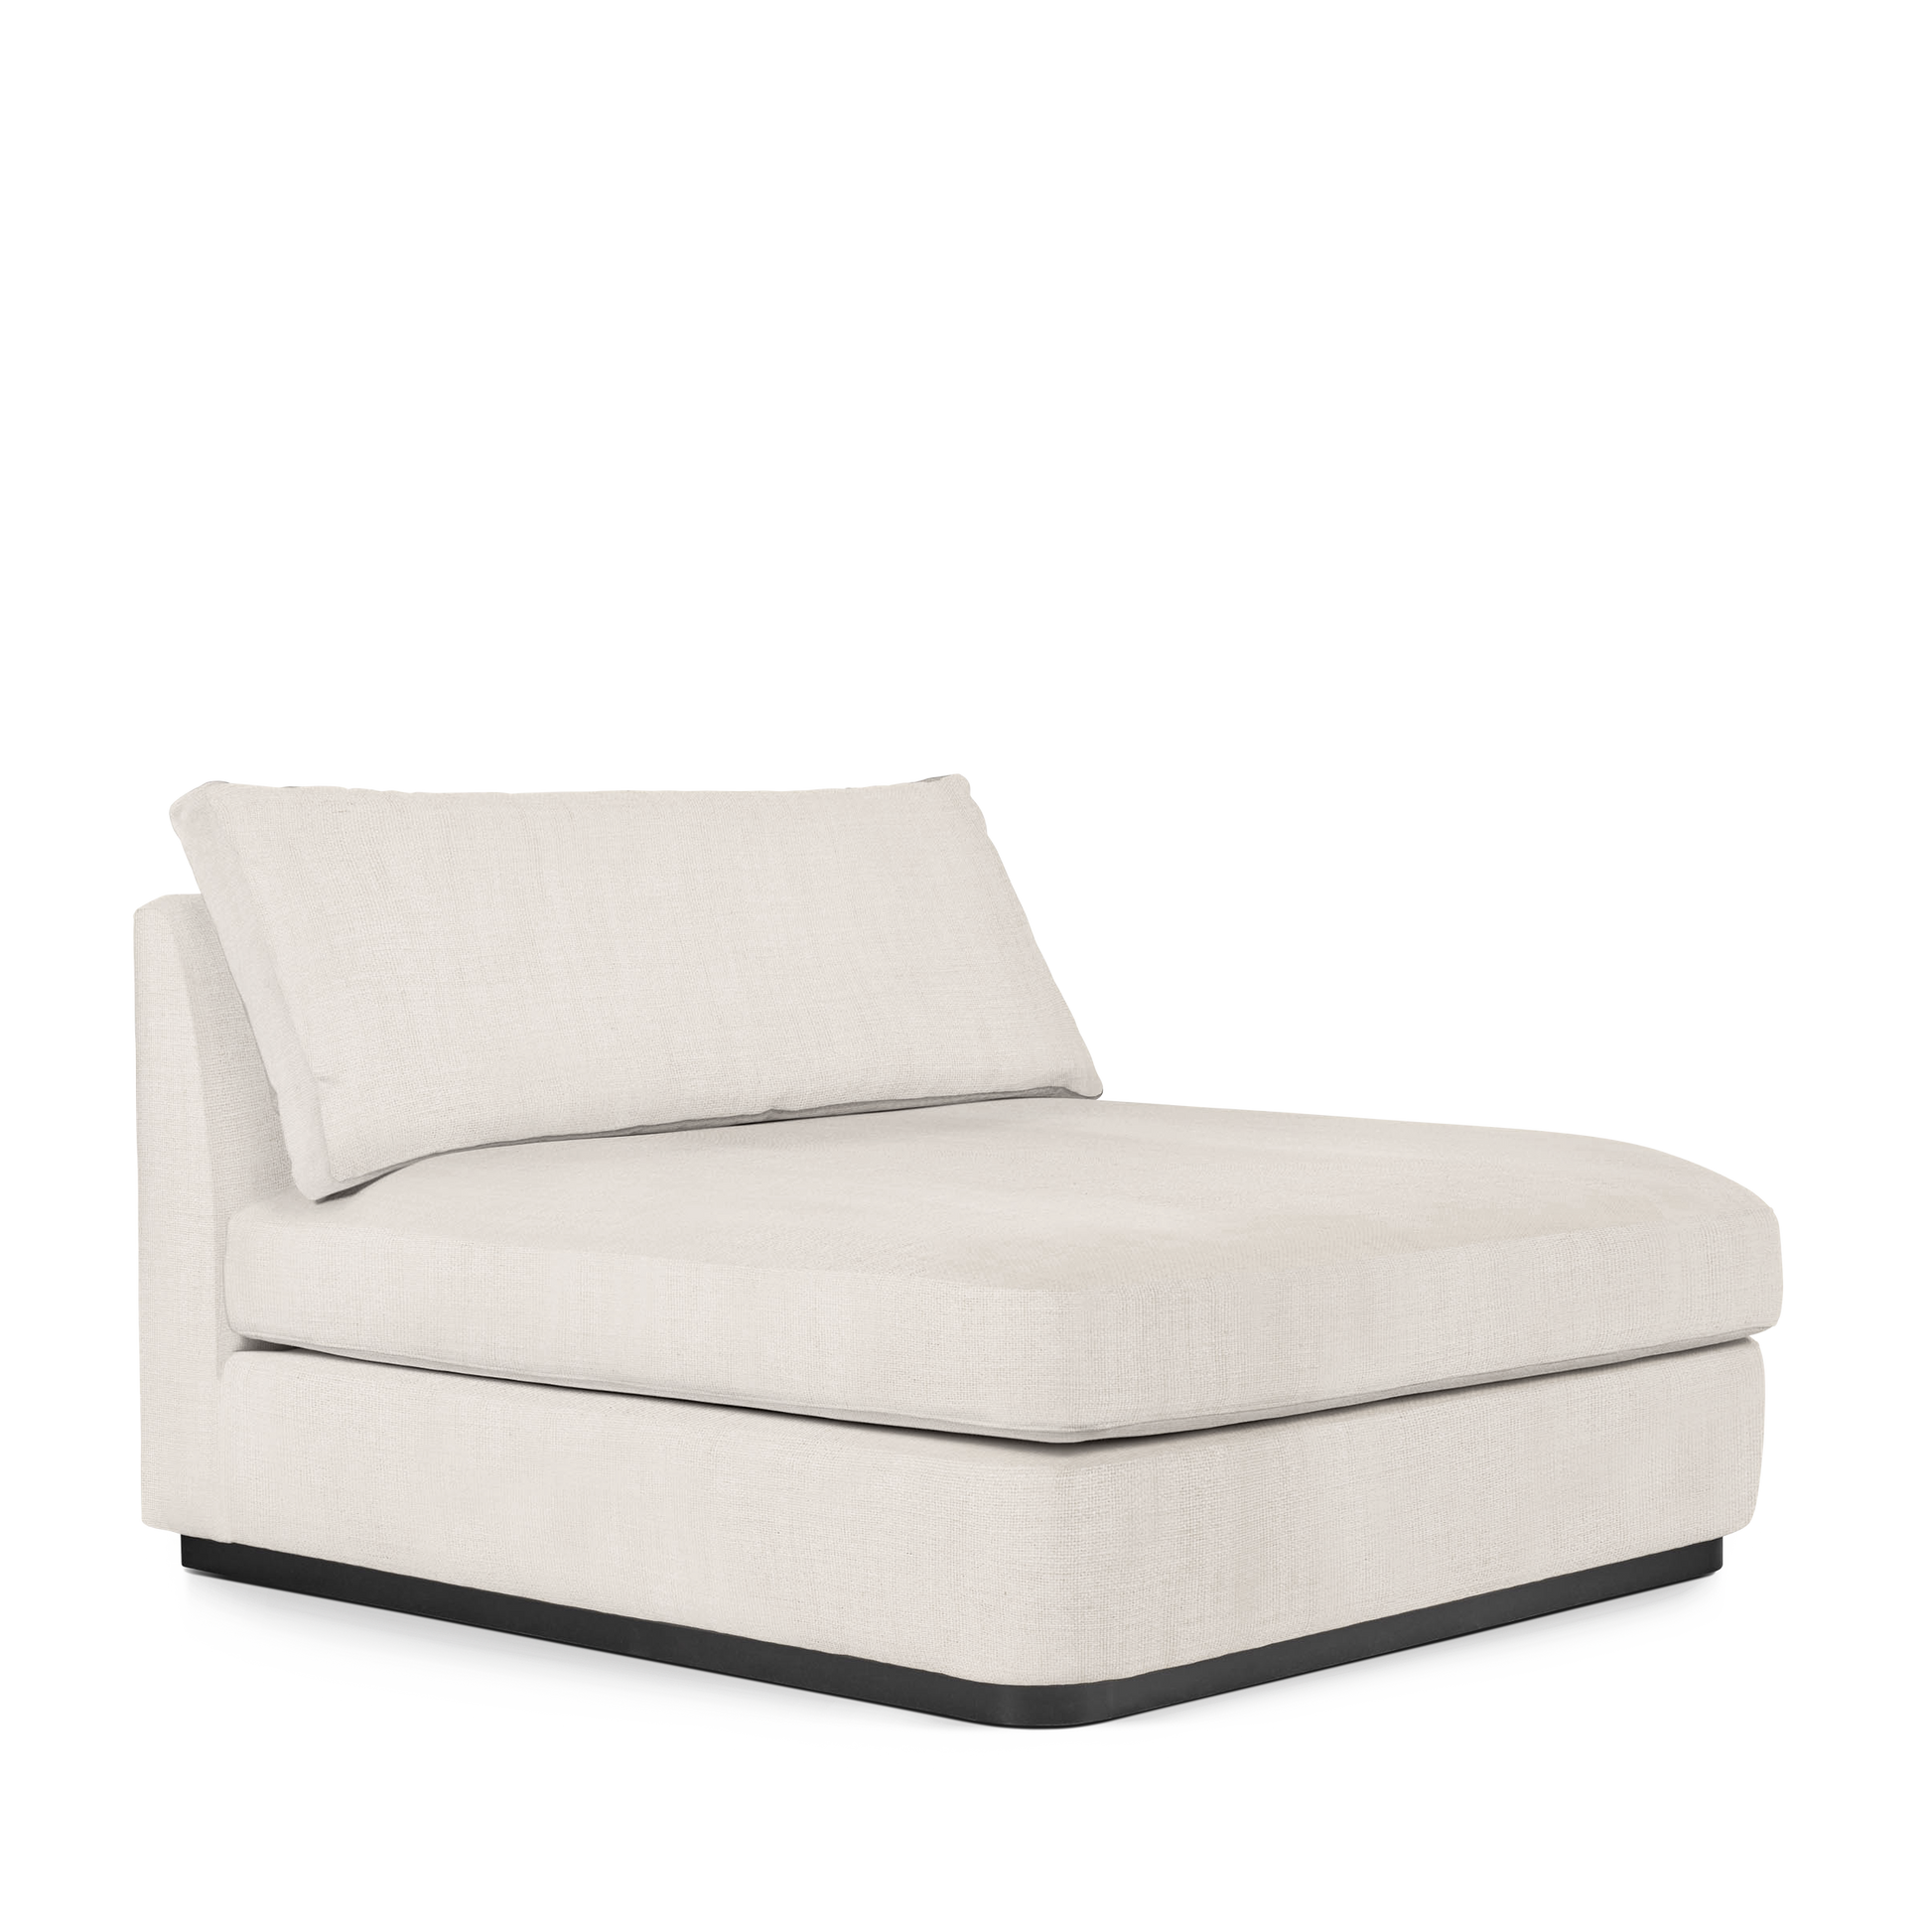 CALMA Lounge Bed with light grey textile 